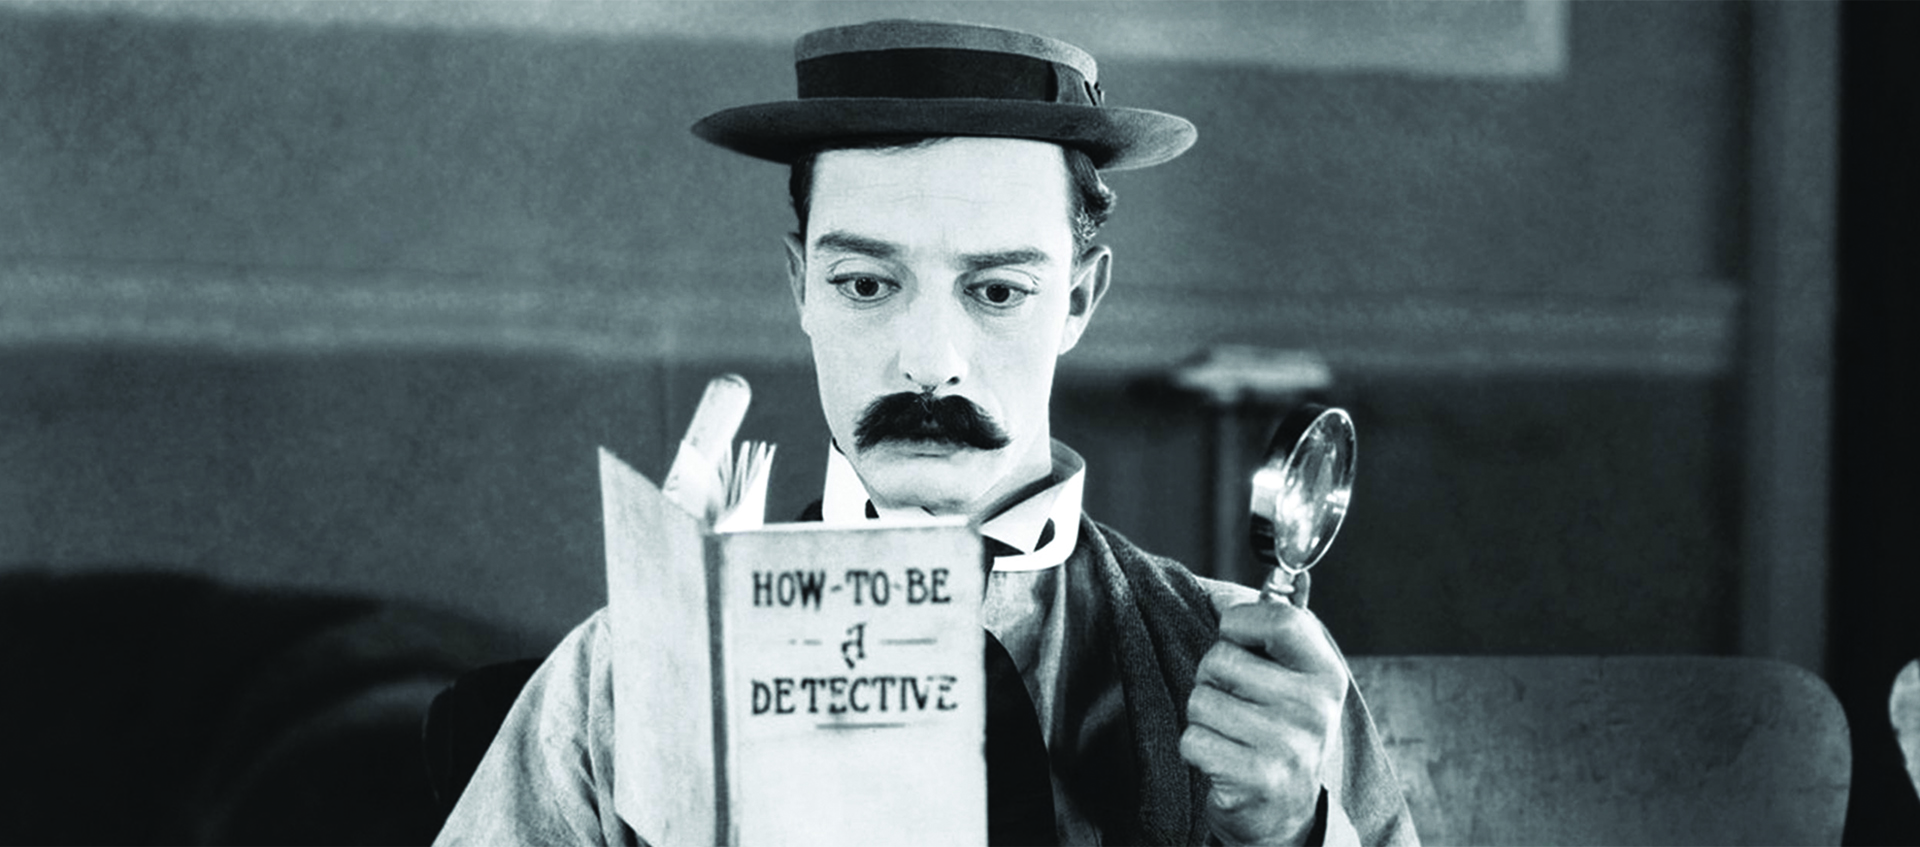 A man dressed like Sherlock Homes with a hat and mustache reads a book while holding a magnifying glass